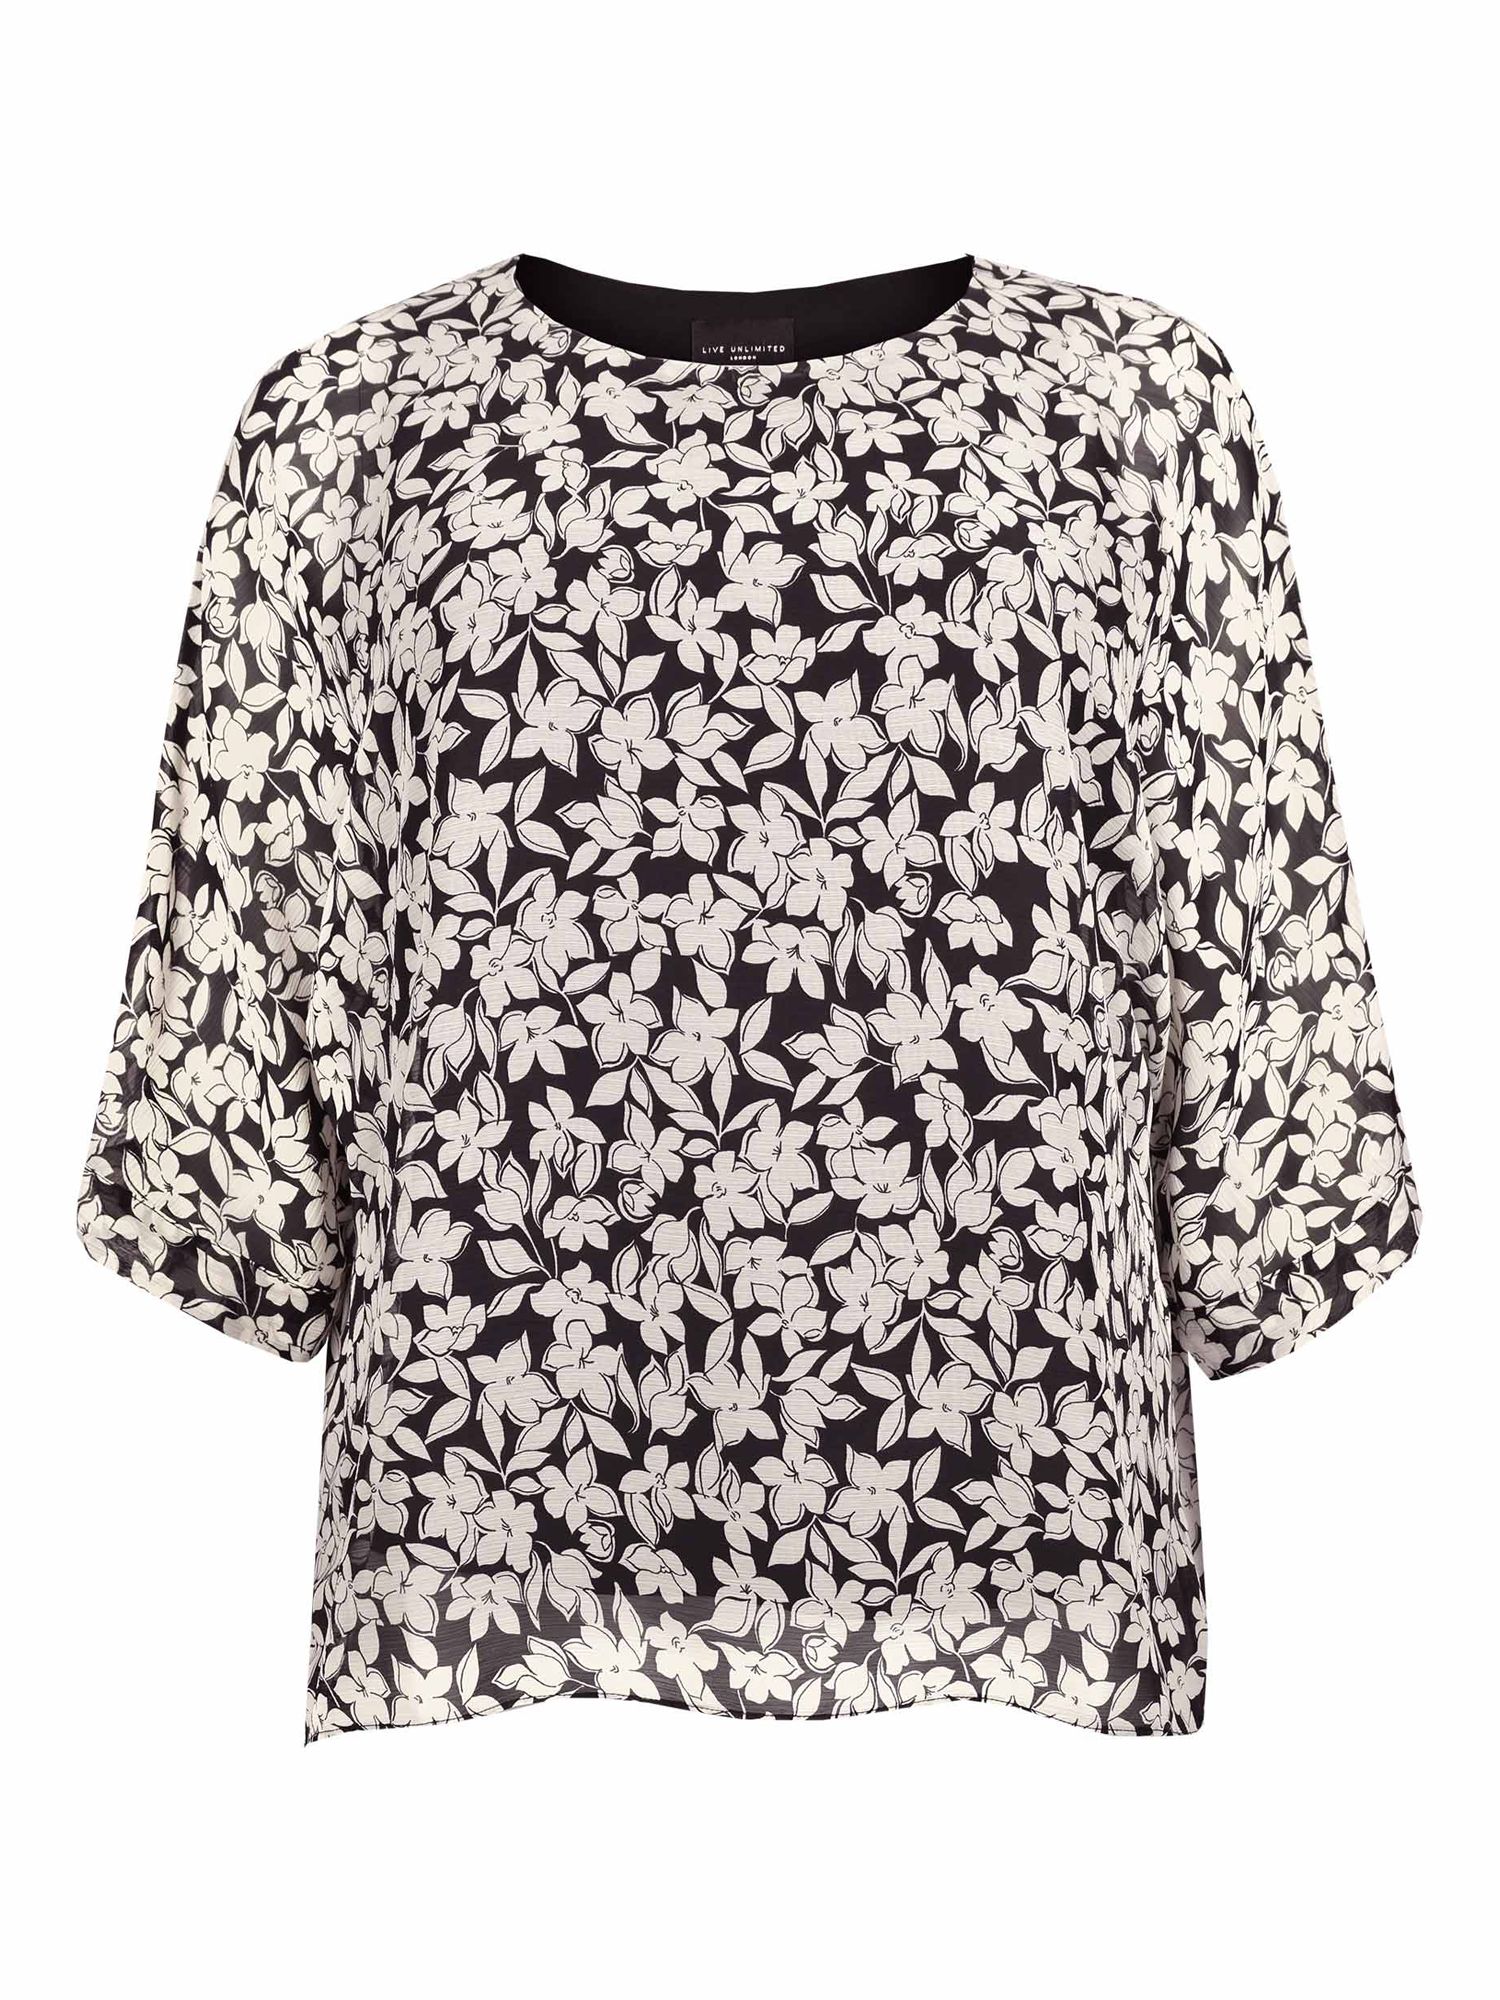 Live Unlimited Chiffon Floral Swing Top, Black/Ivory at John Lewis ...